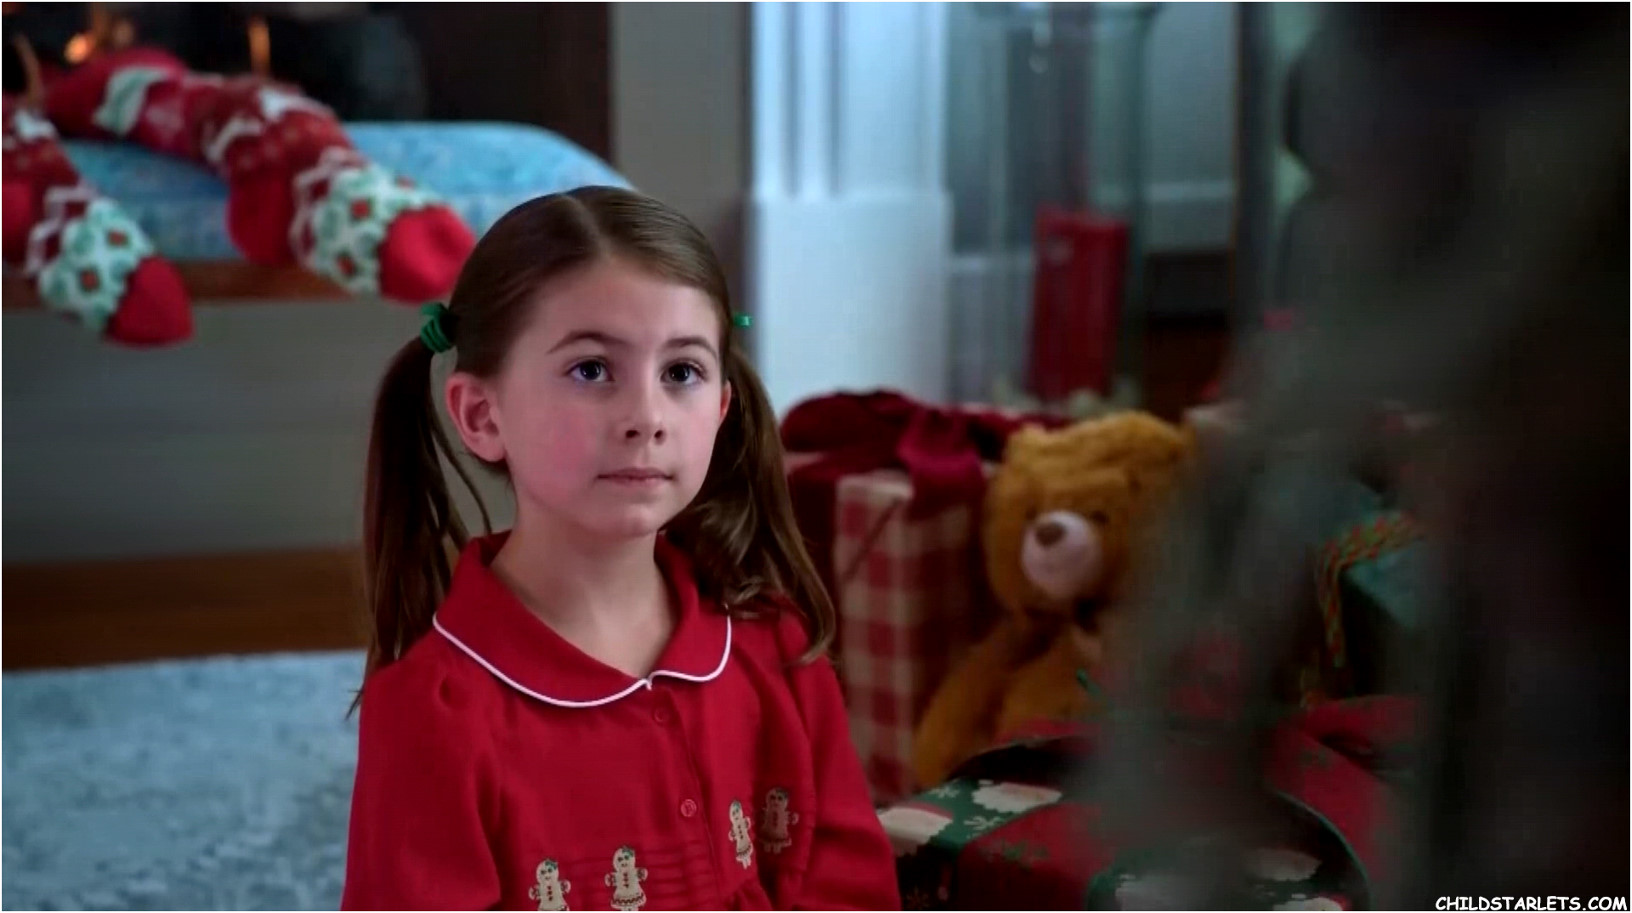 Abby Villasmil "Haul Out the Holly" - 2022/HD